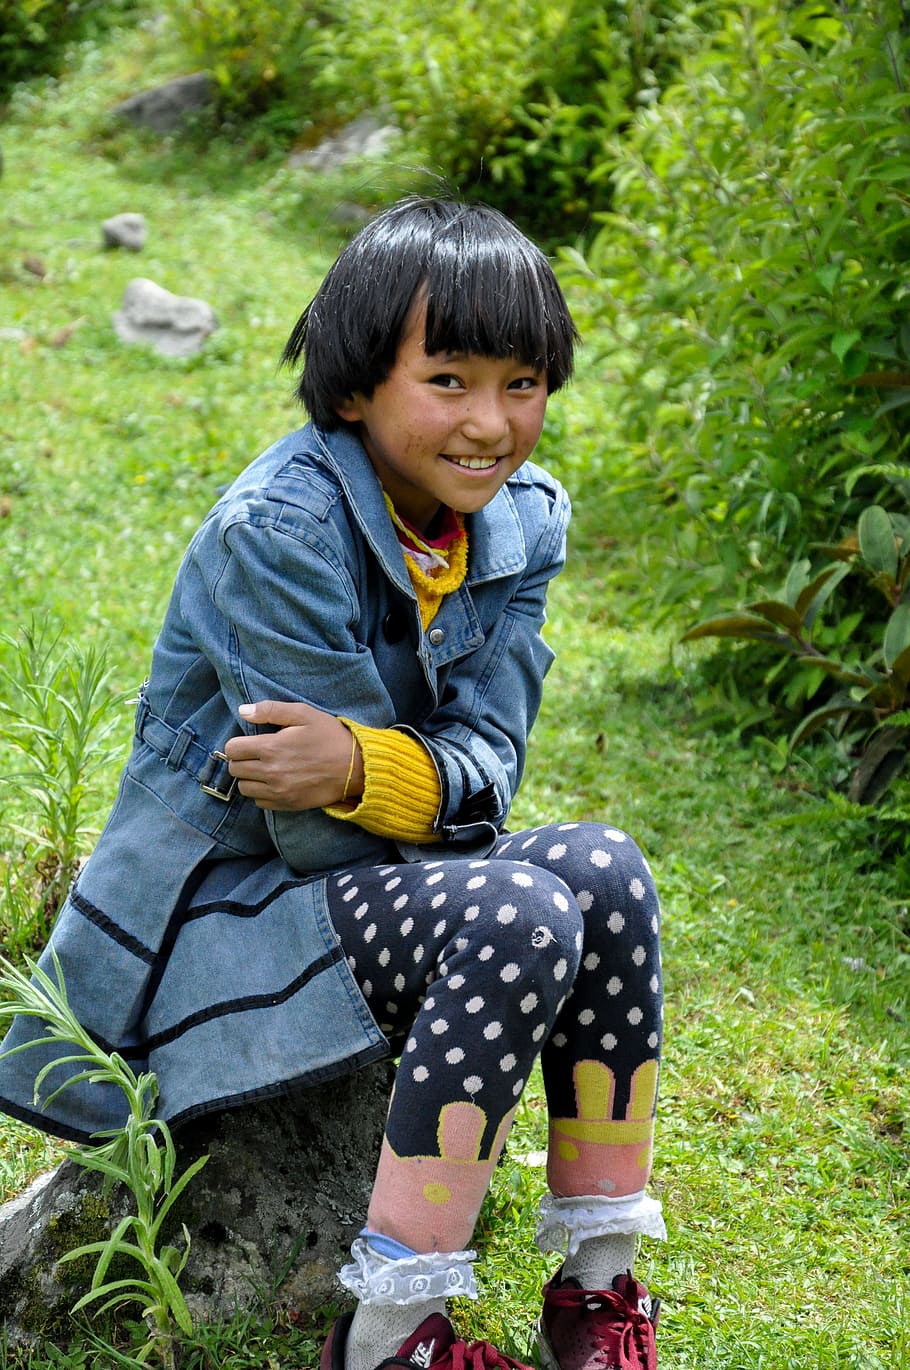 tibet, kids, grassland, one person, childhood, child, real people, plant, casual clothing, full length